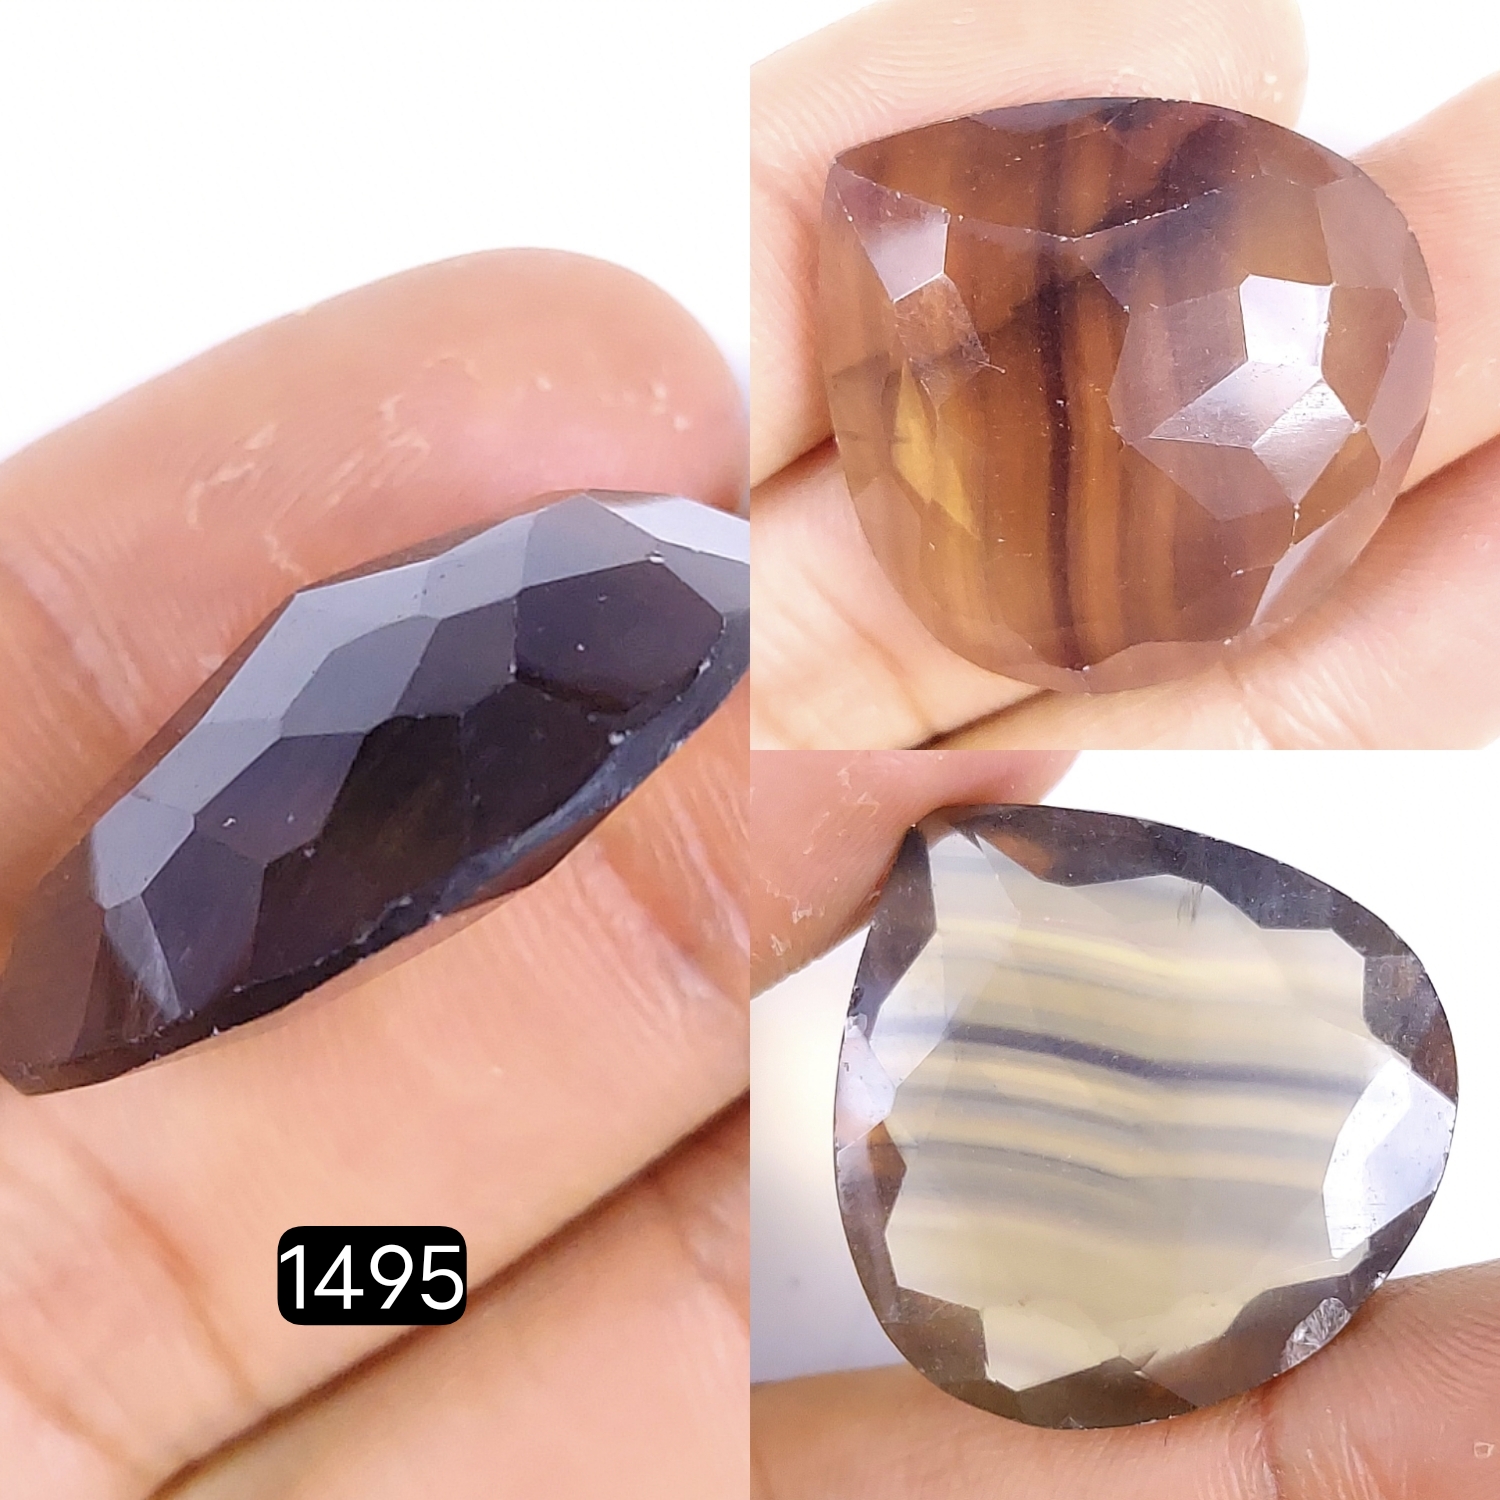 1Pcs 63Cts Natural Multi Flourite Faceted Pear Shape Loose Gemstone30x30mm#1495